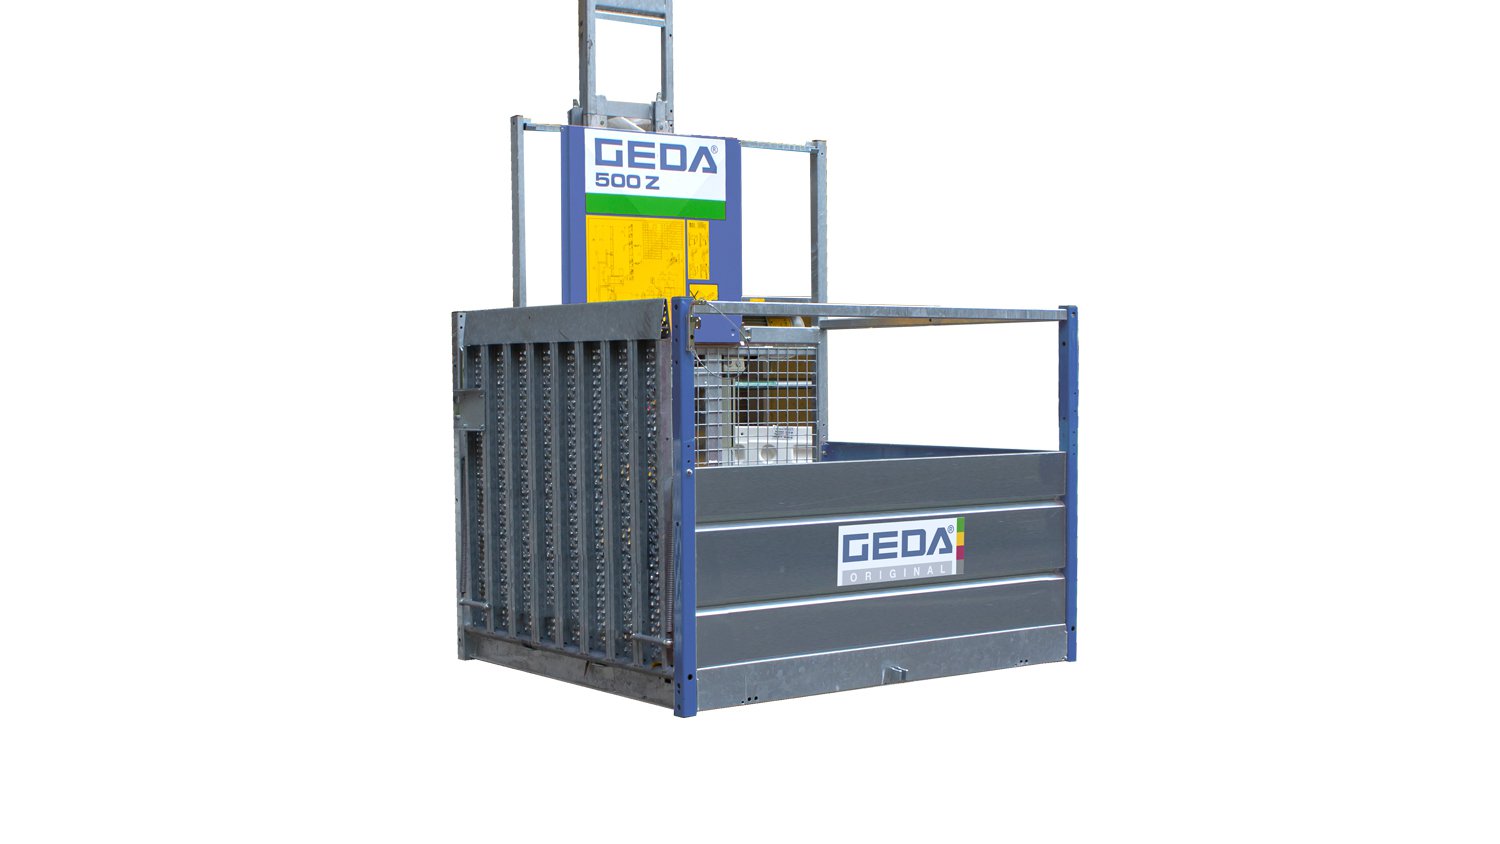 A GEDA 500Z Goods-only hoist for construction materials